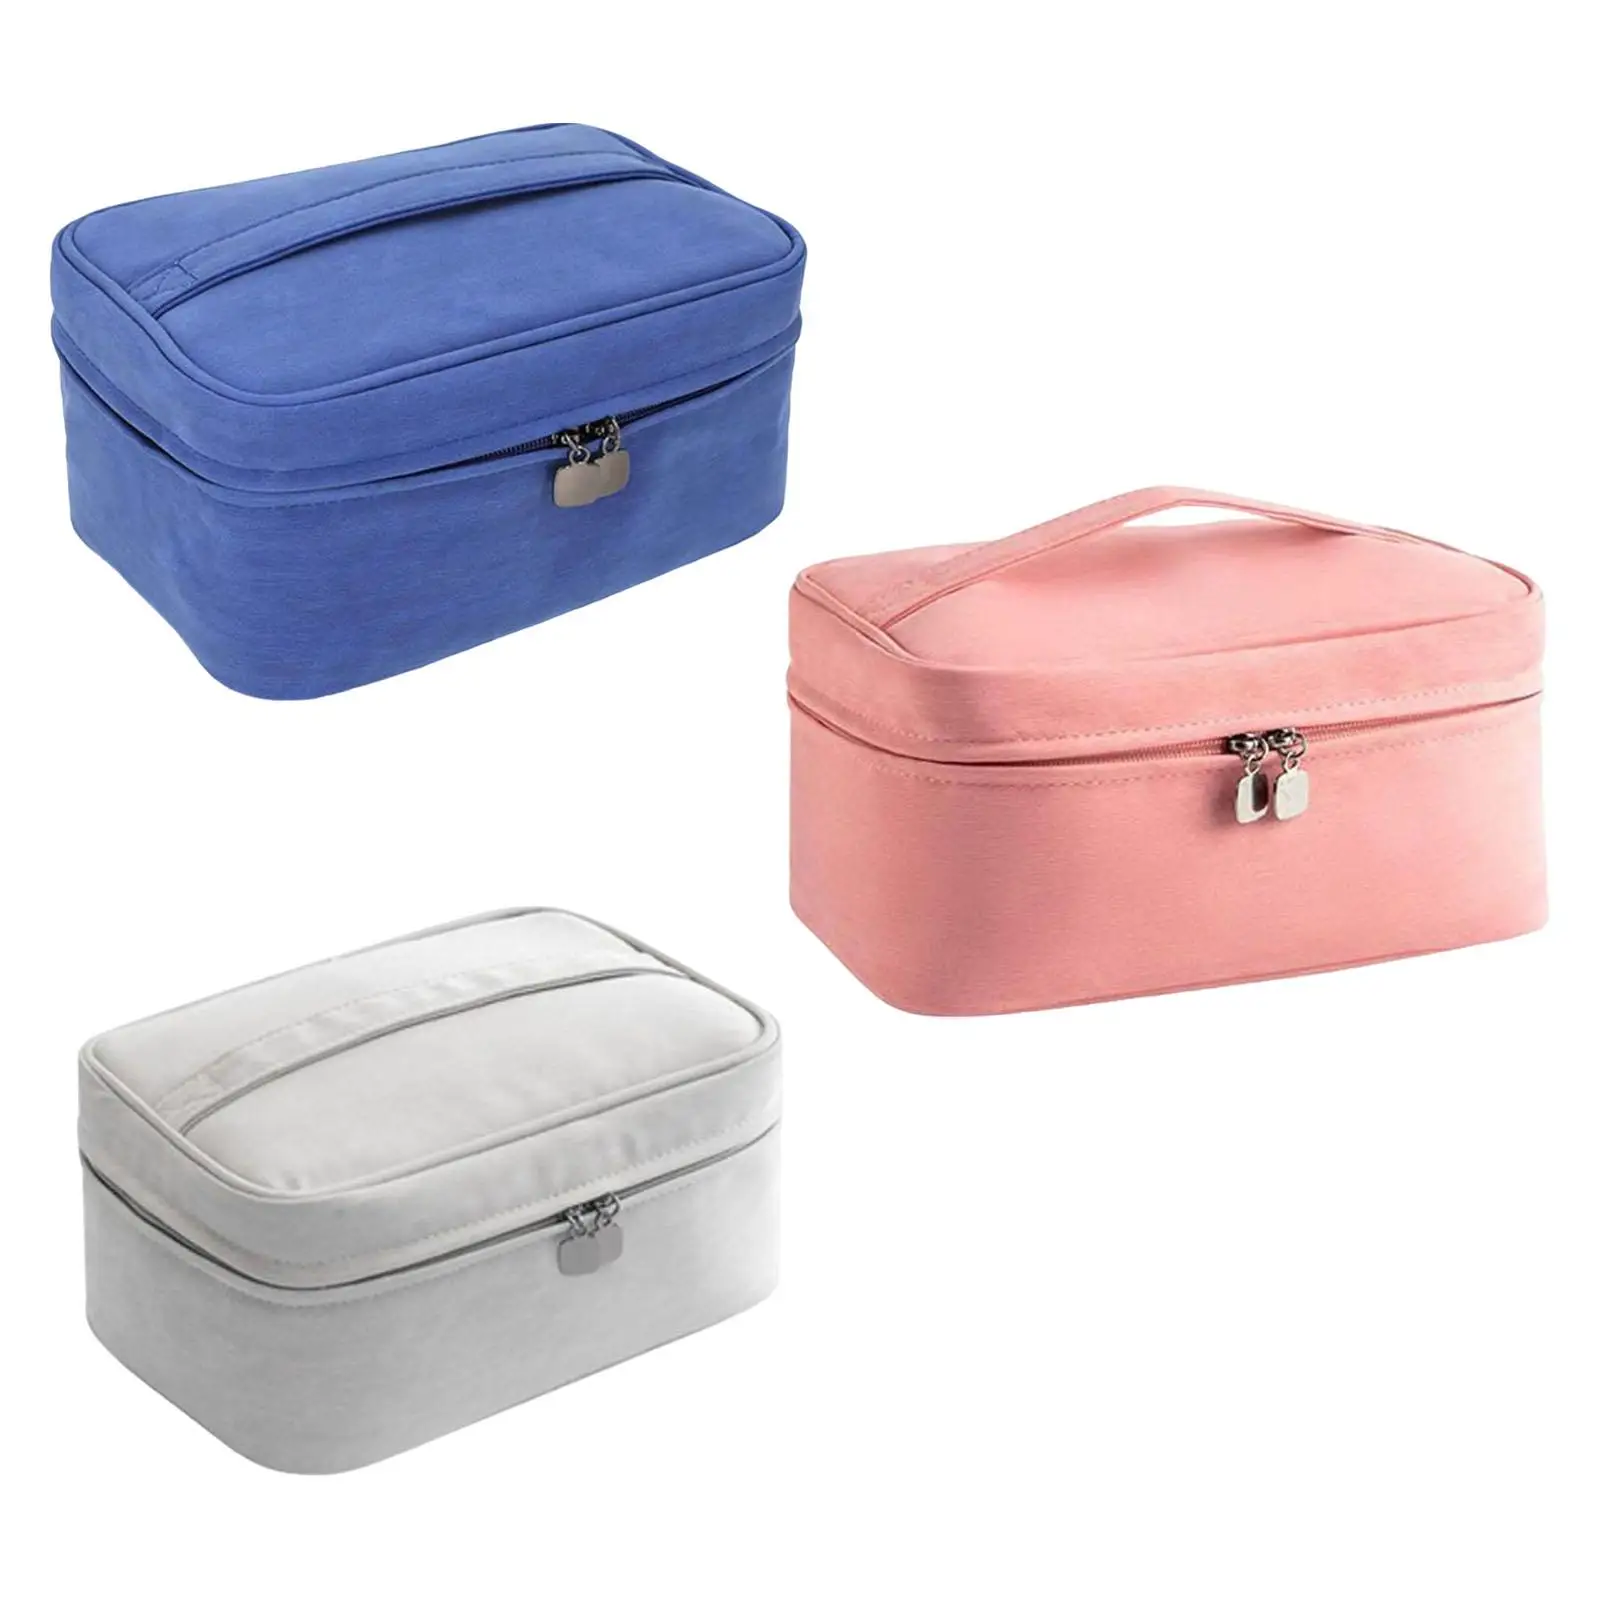 Makeup Organizer Bag with Detachable Pouch with Brush Holder Pouch PU Resin Cosmetic Bag Make up Bag for Foundation Women Girls